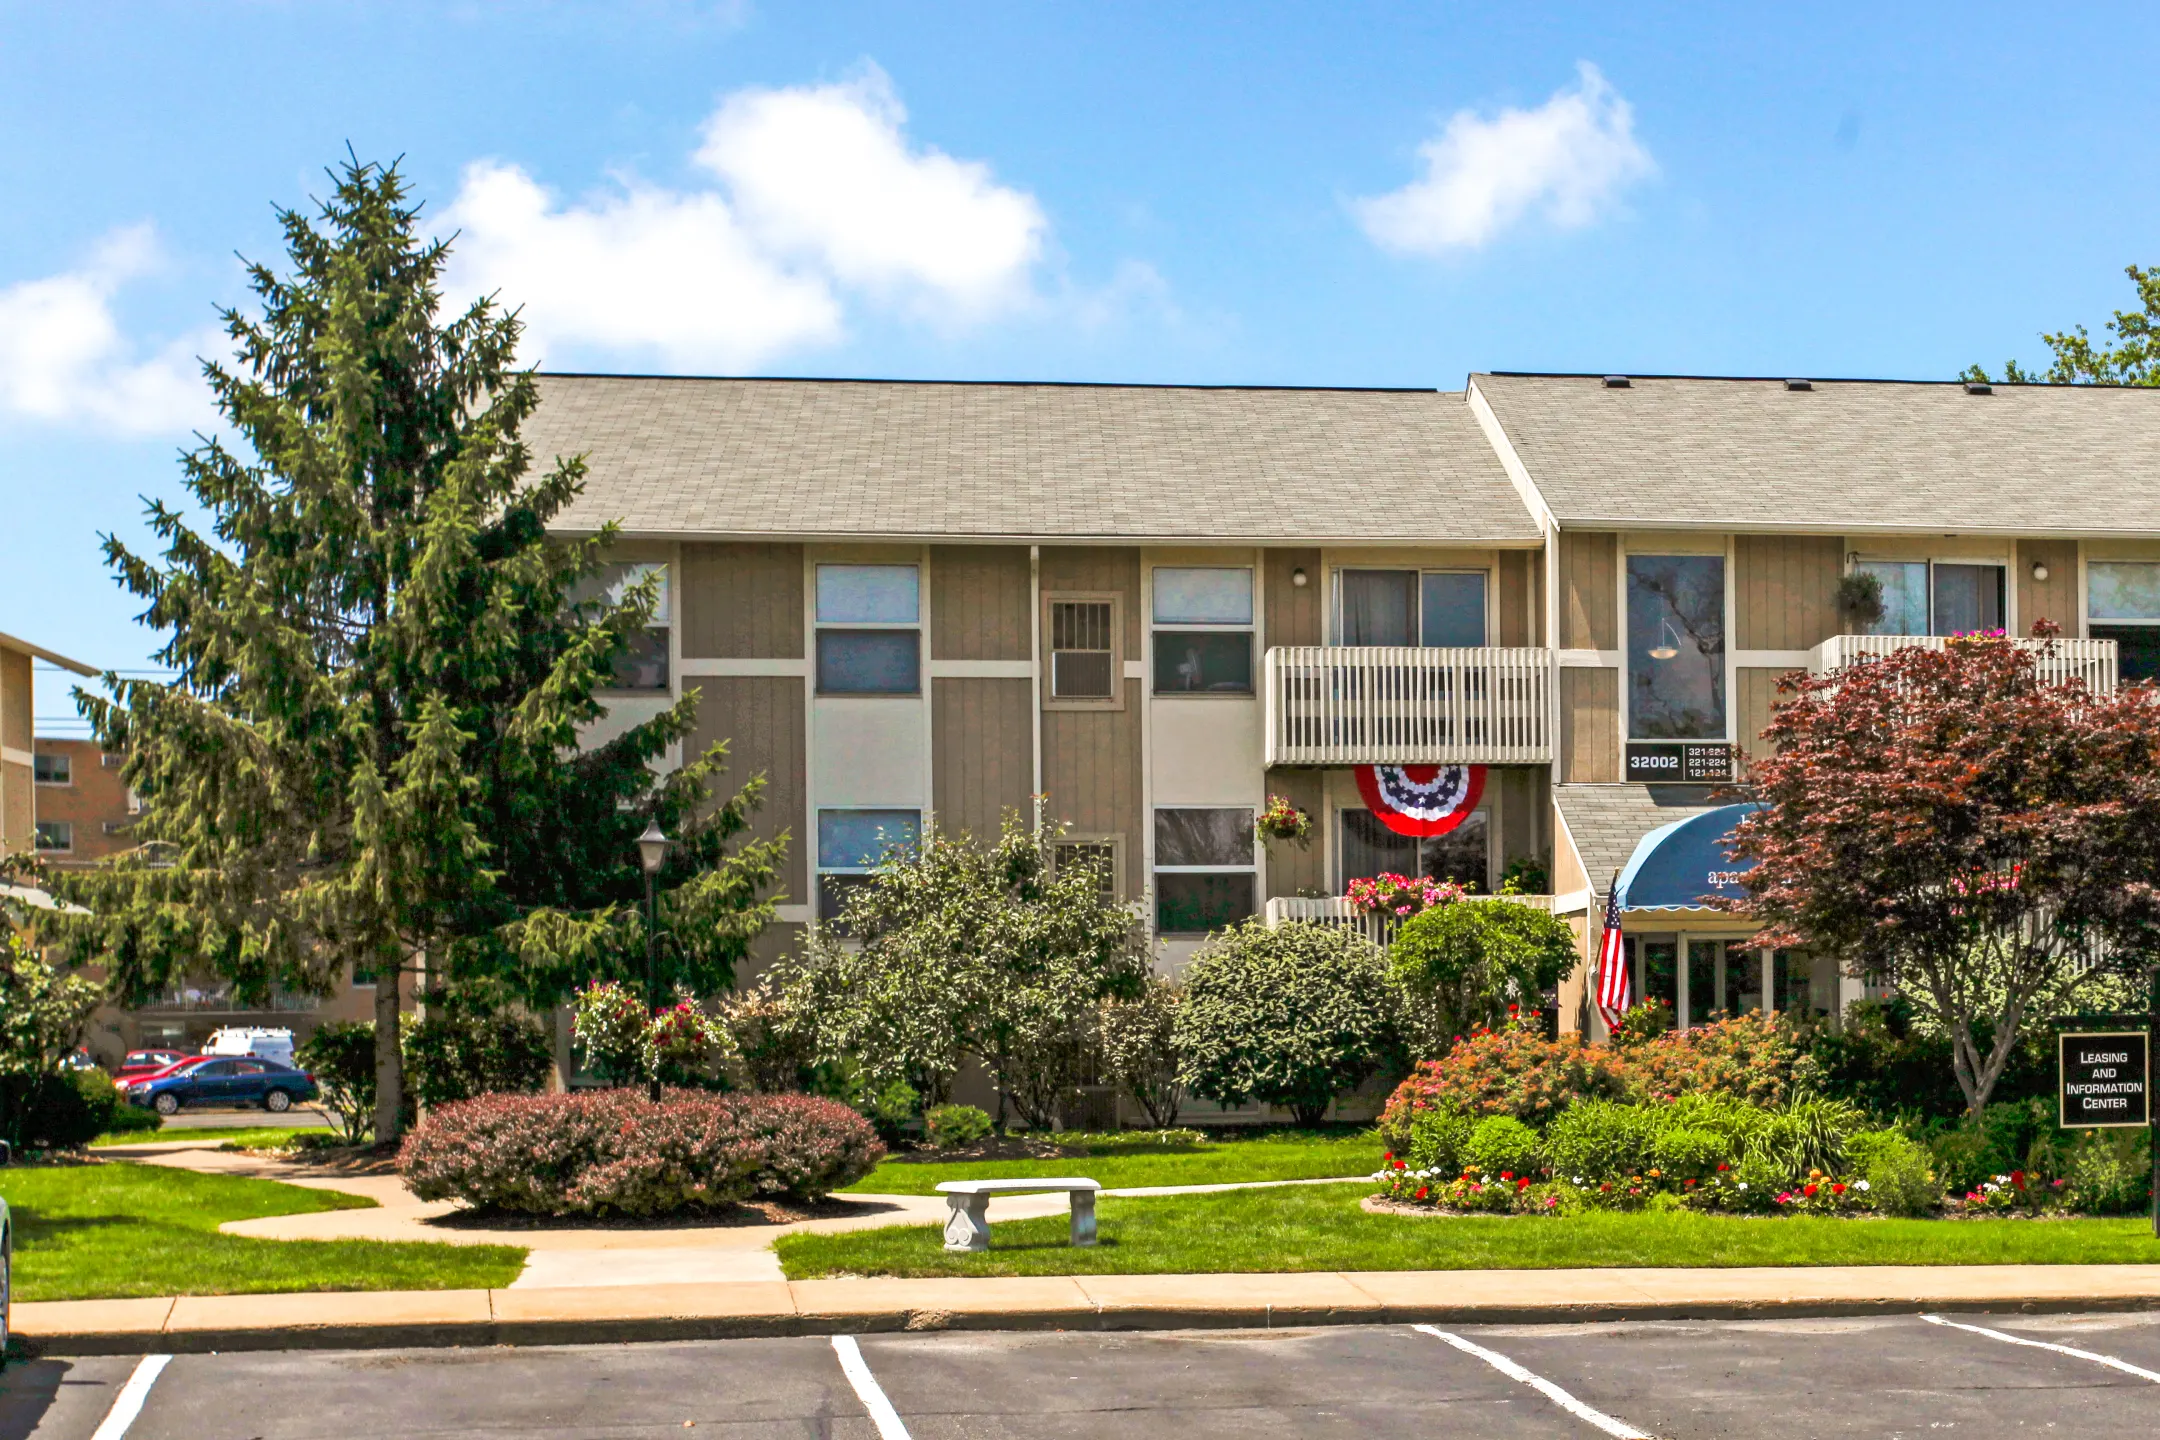 Building - Bay Club Apartments - Willowick, OH